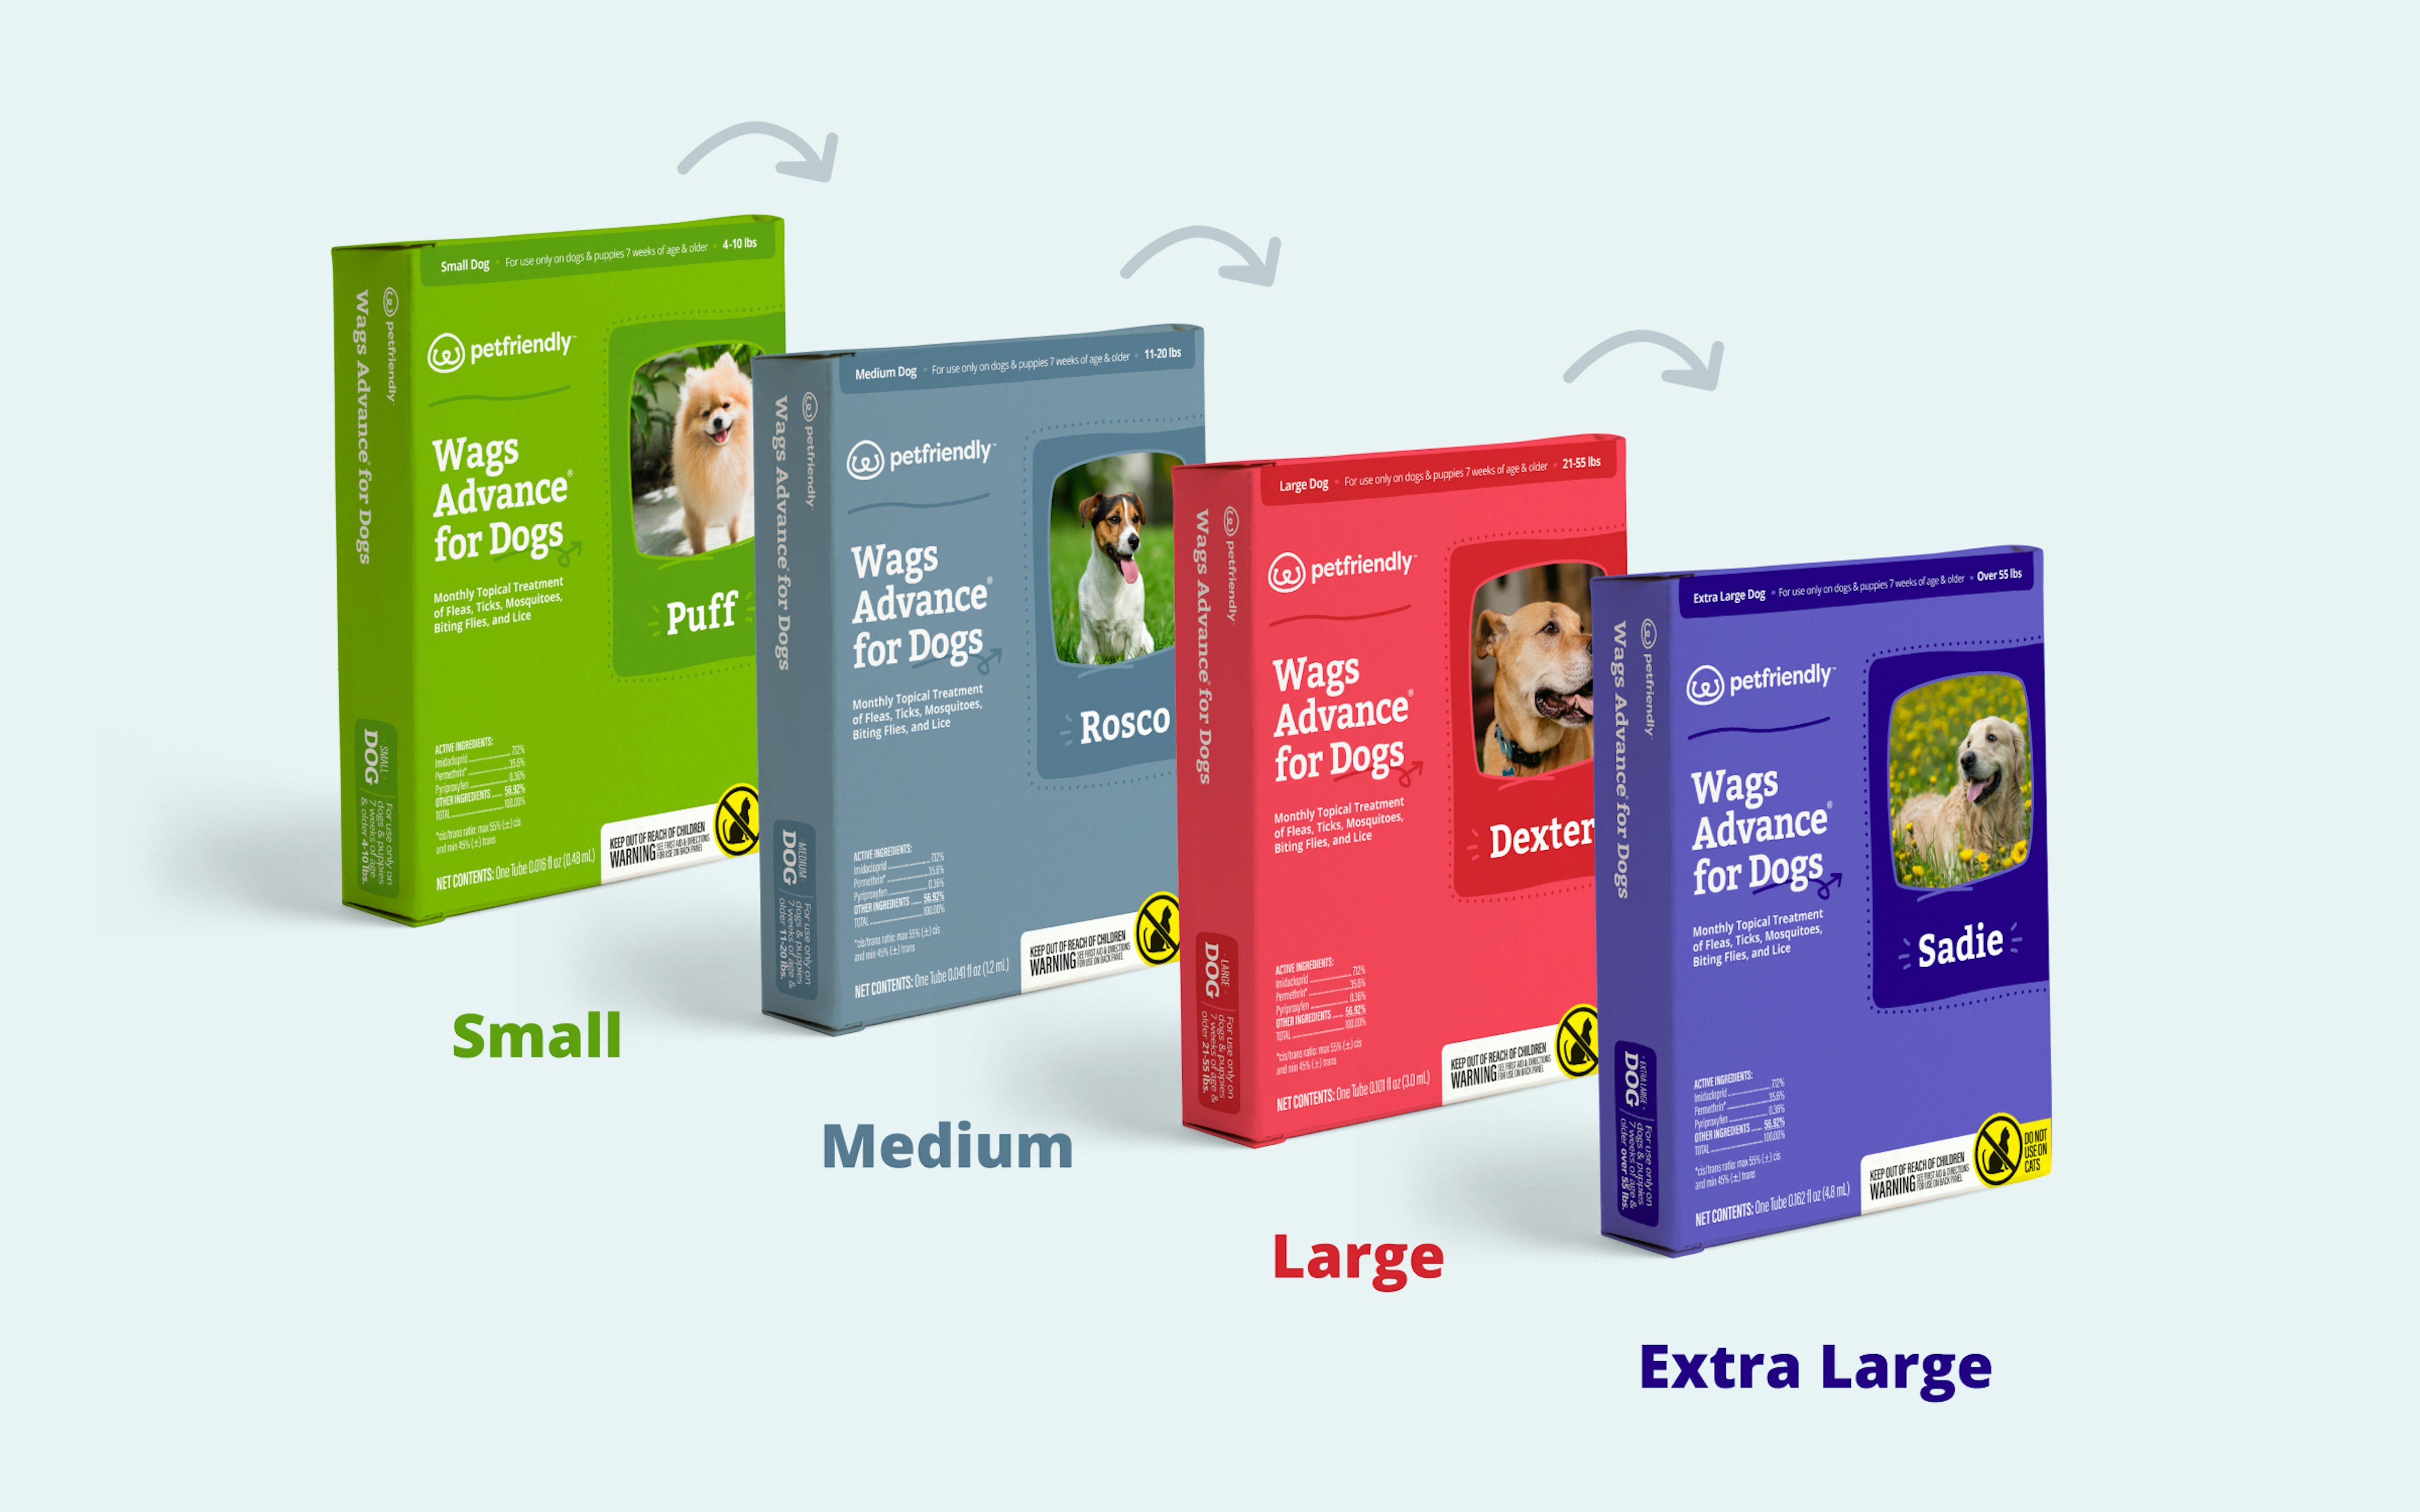 Flea & Tick Protection for Dogs Sizes